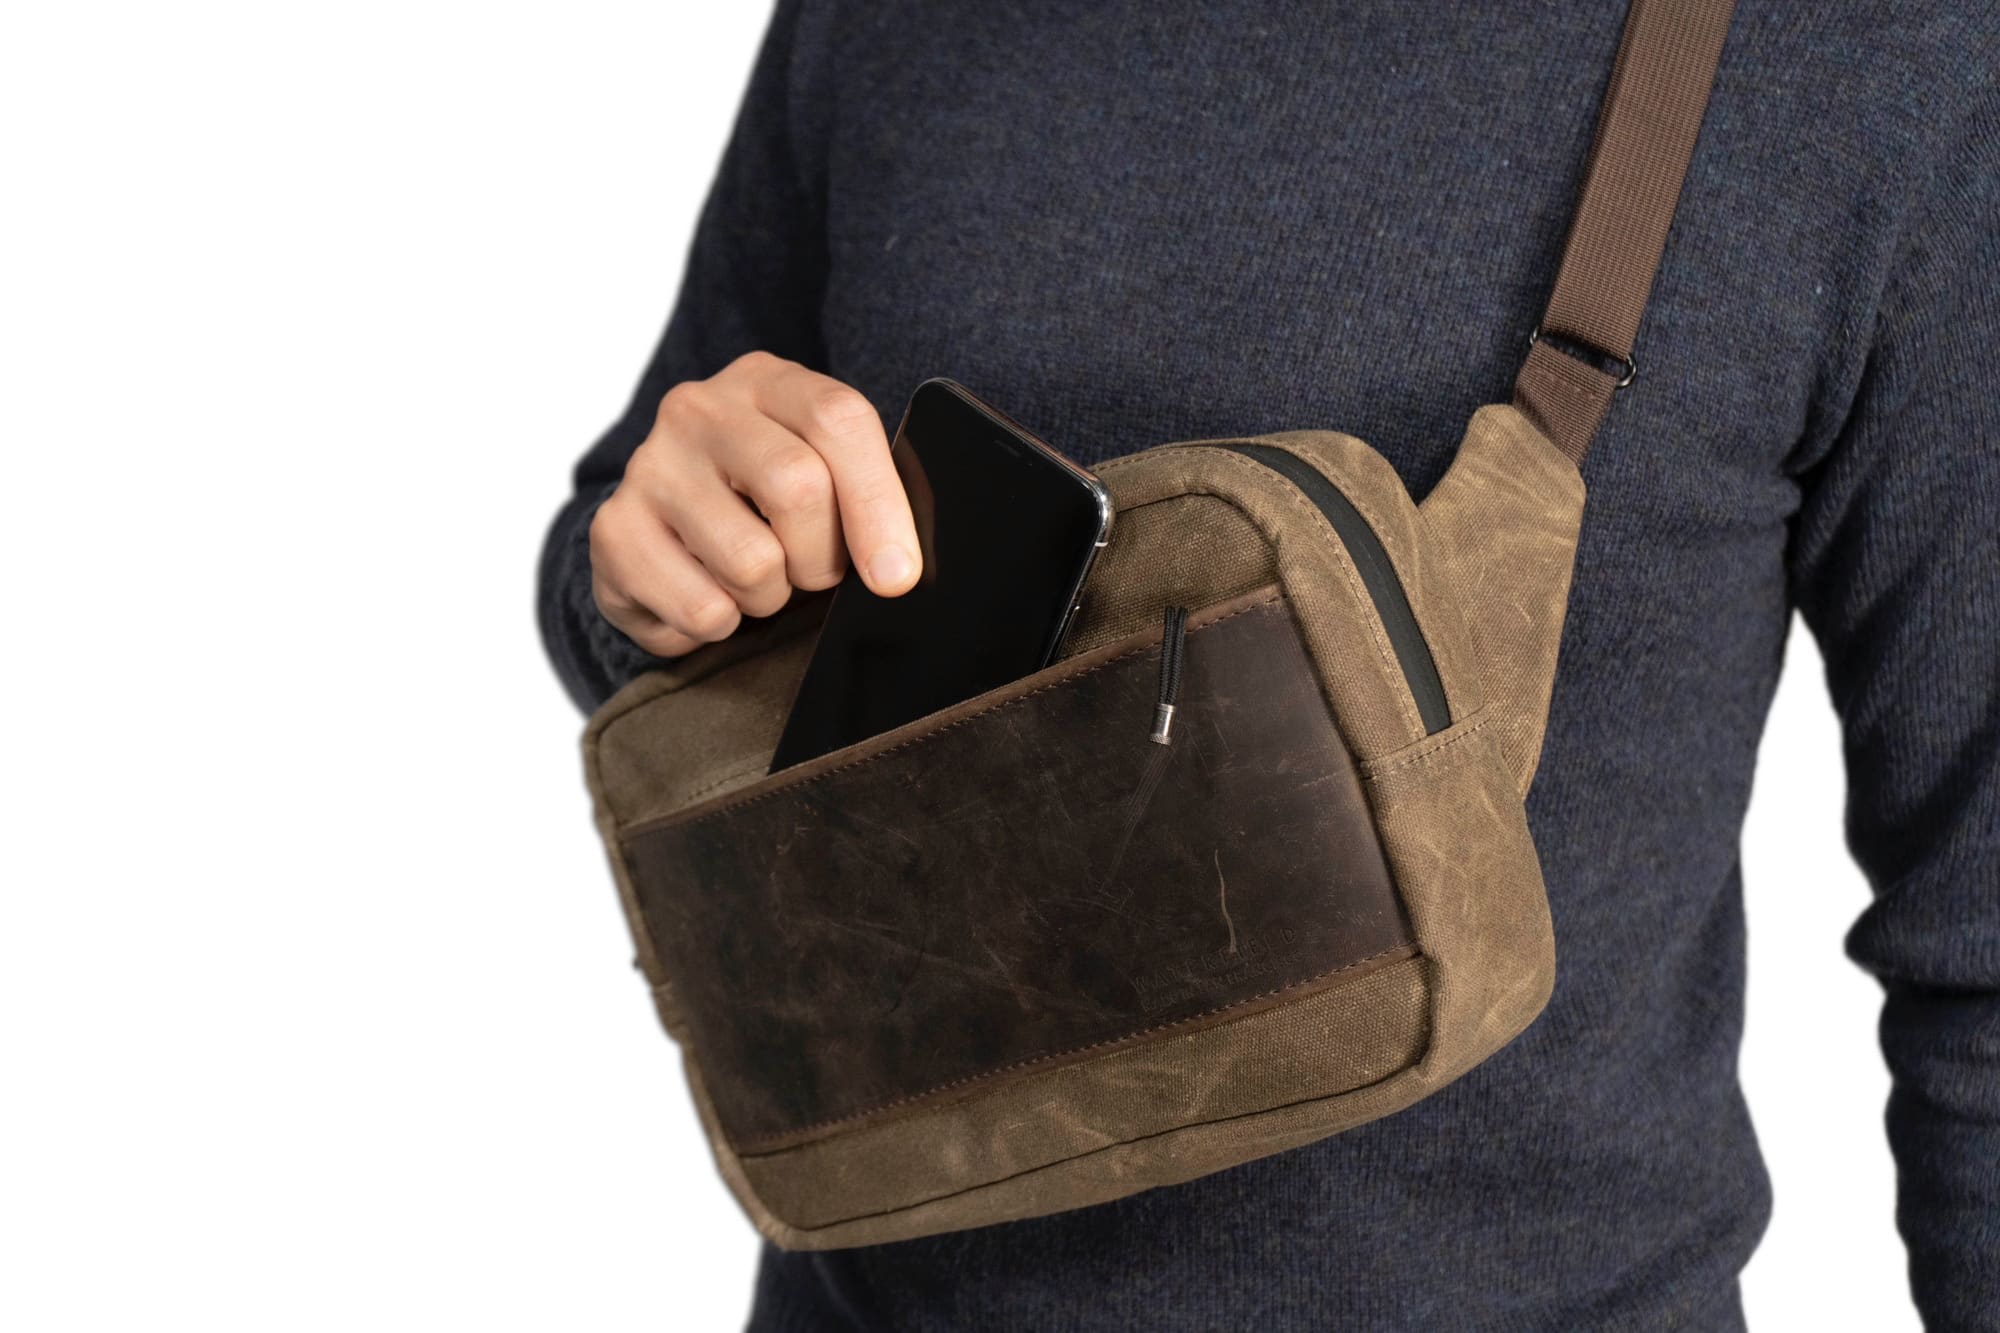 There’s even a spot in the WaterField Sutter Sling Pouch for your iPhone.